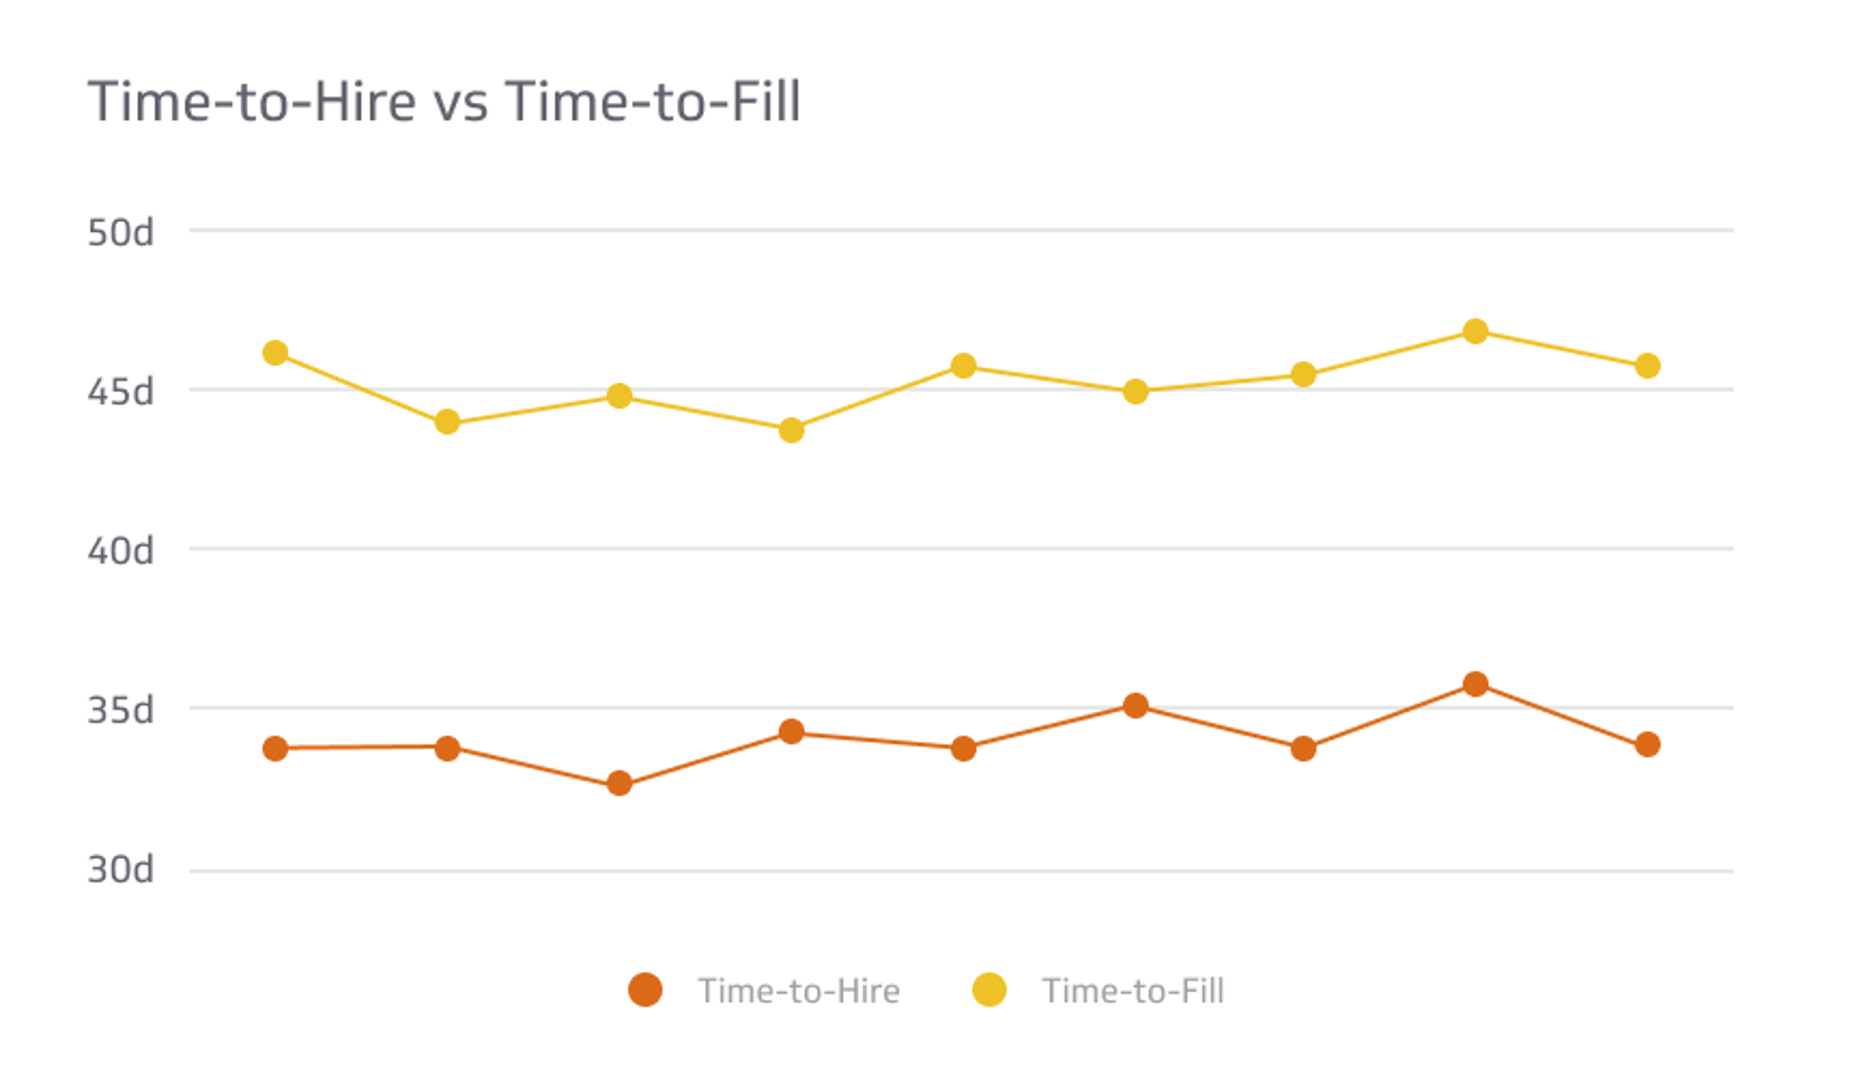 Related KPI Examples - Time-to-Hire vs Time-to-Fill Metric